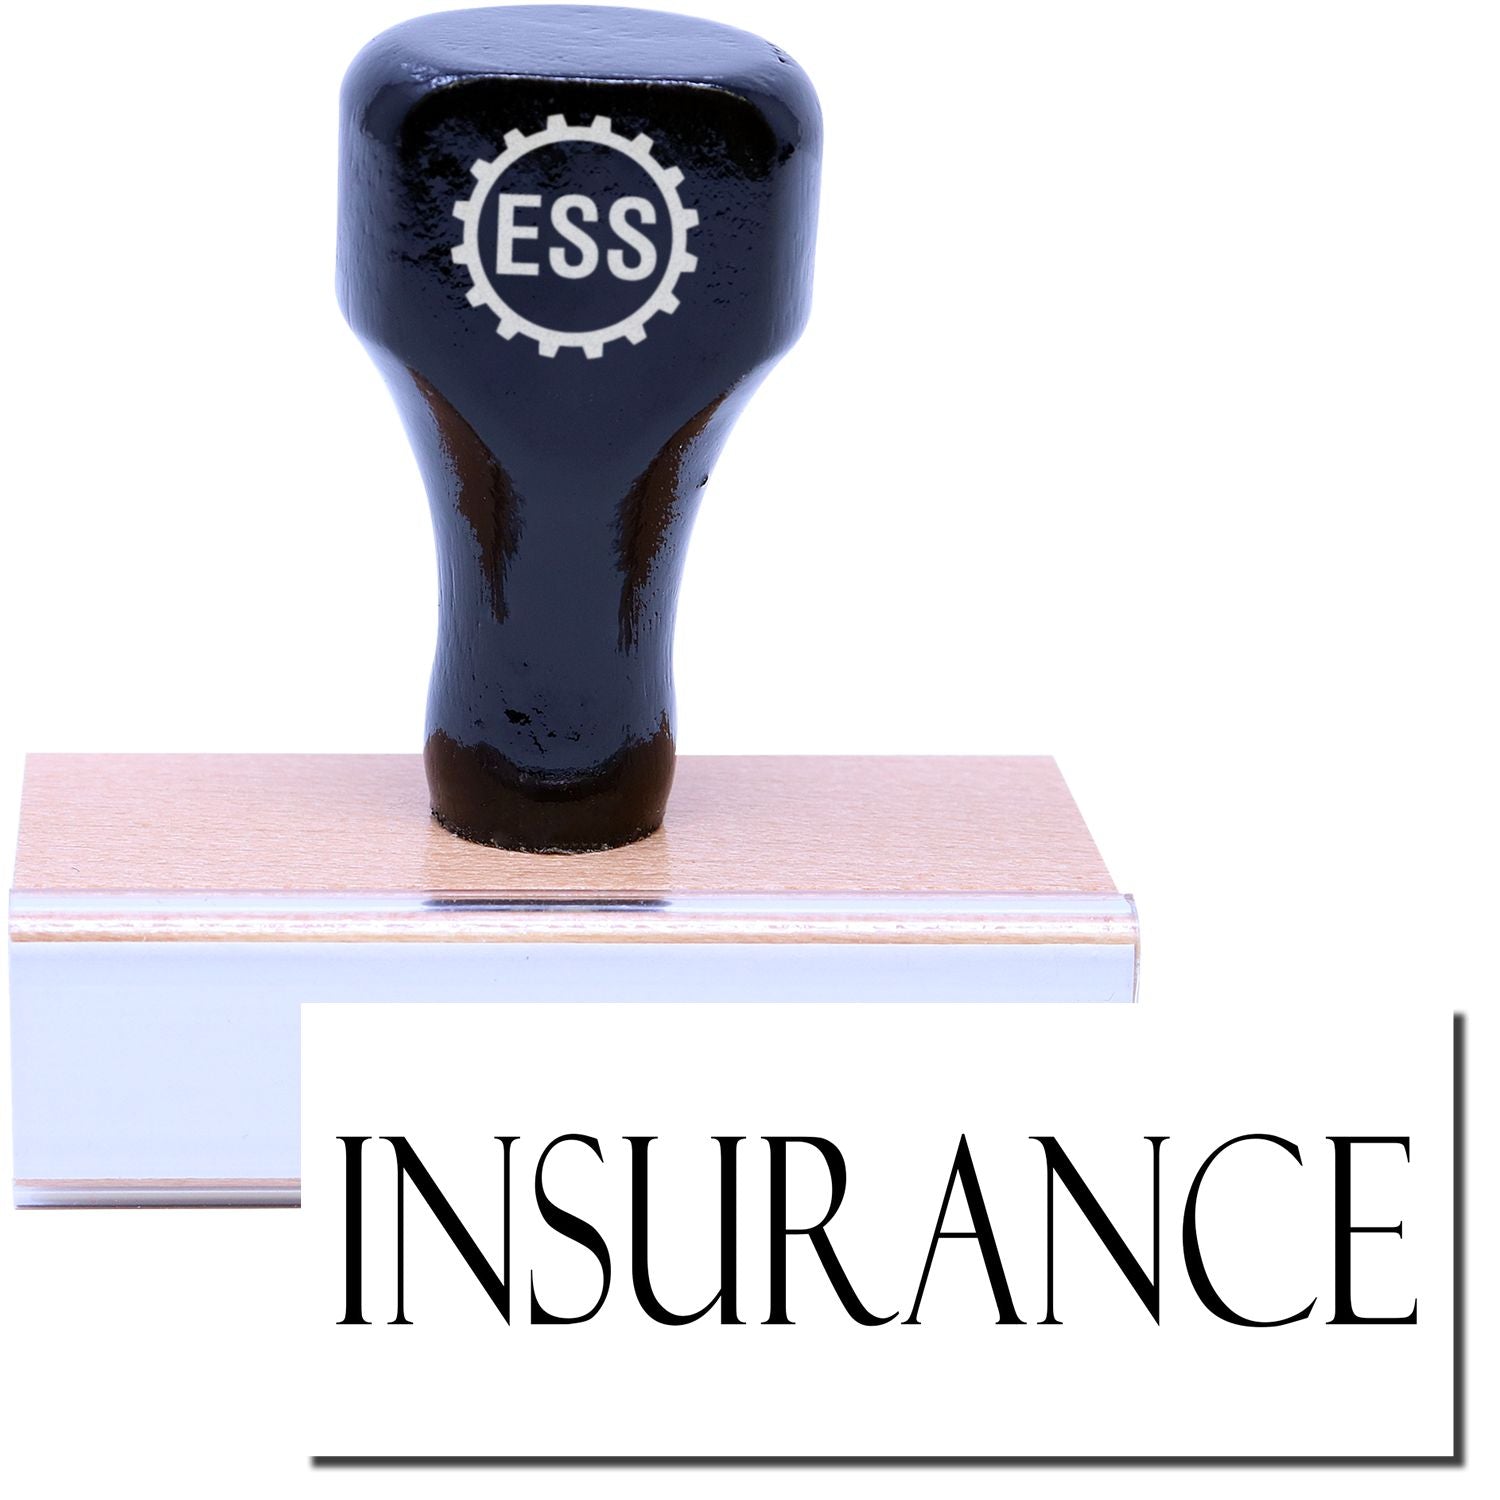 A stock office rubber stamp with a stamped image showing how the text "INSURANCE" in a large font is displayed after stamping.